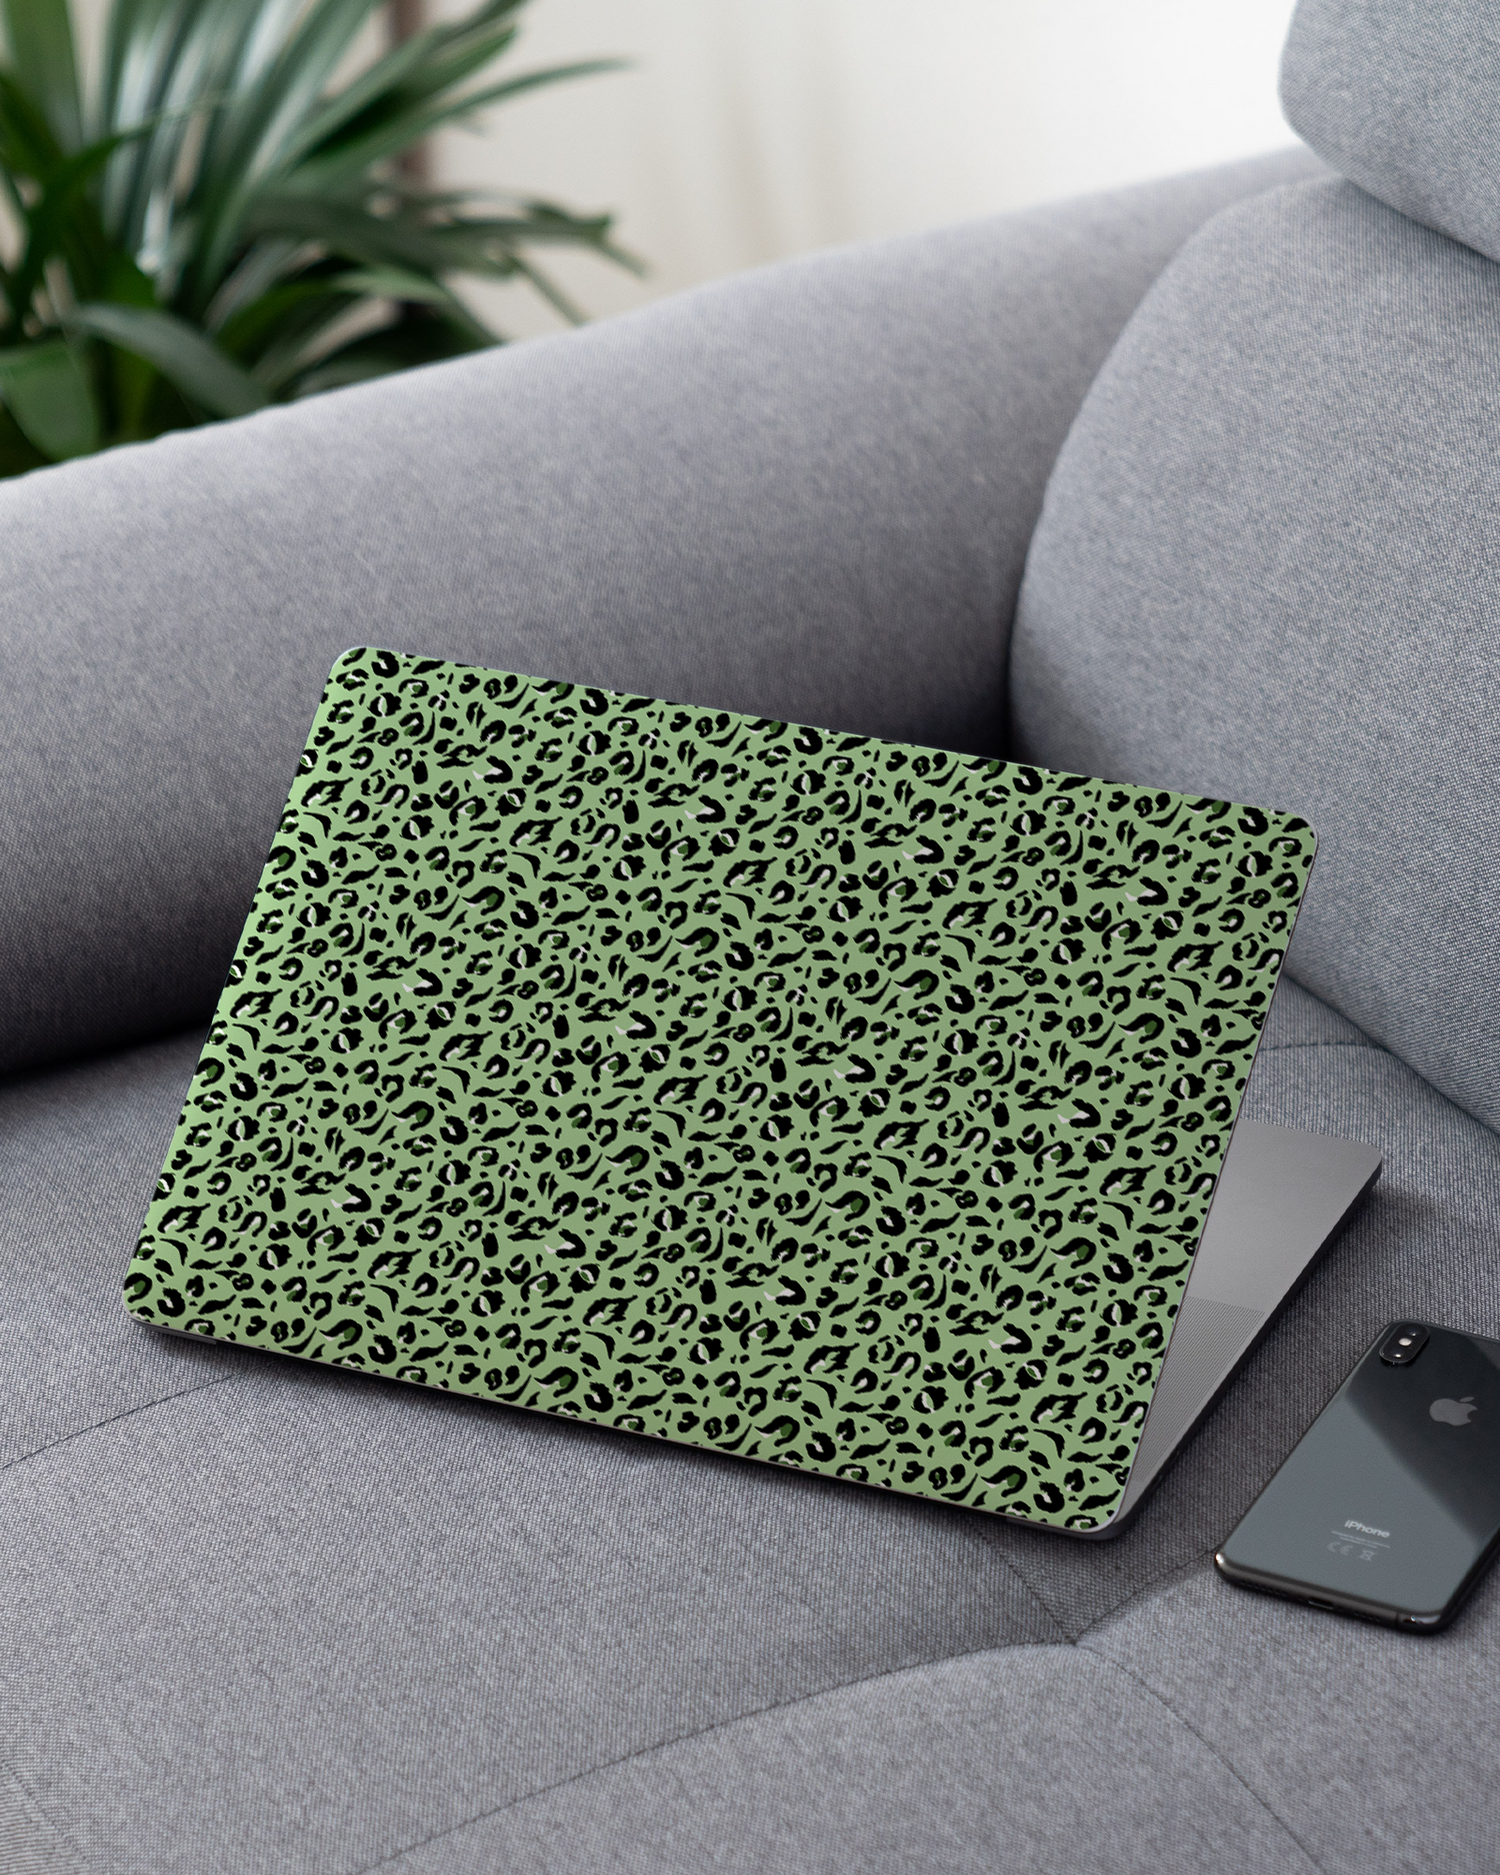 Mint Leopard Laptop Skin for 13 inch Apple MacBooks on a couch